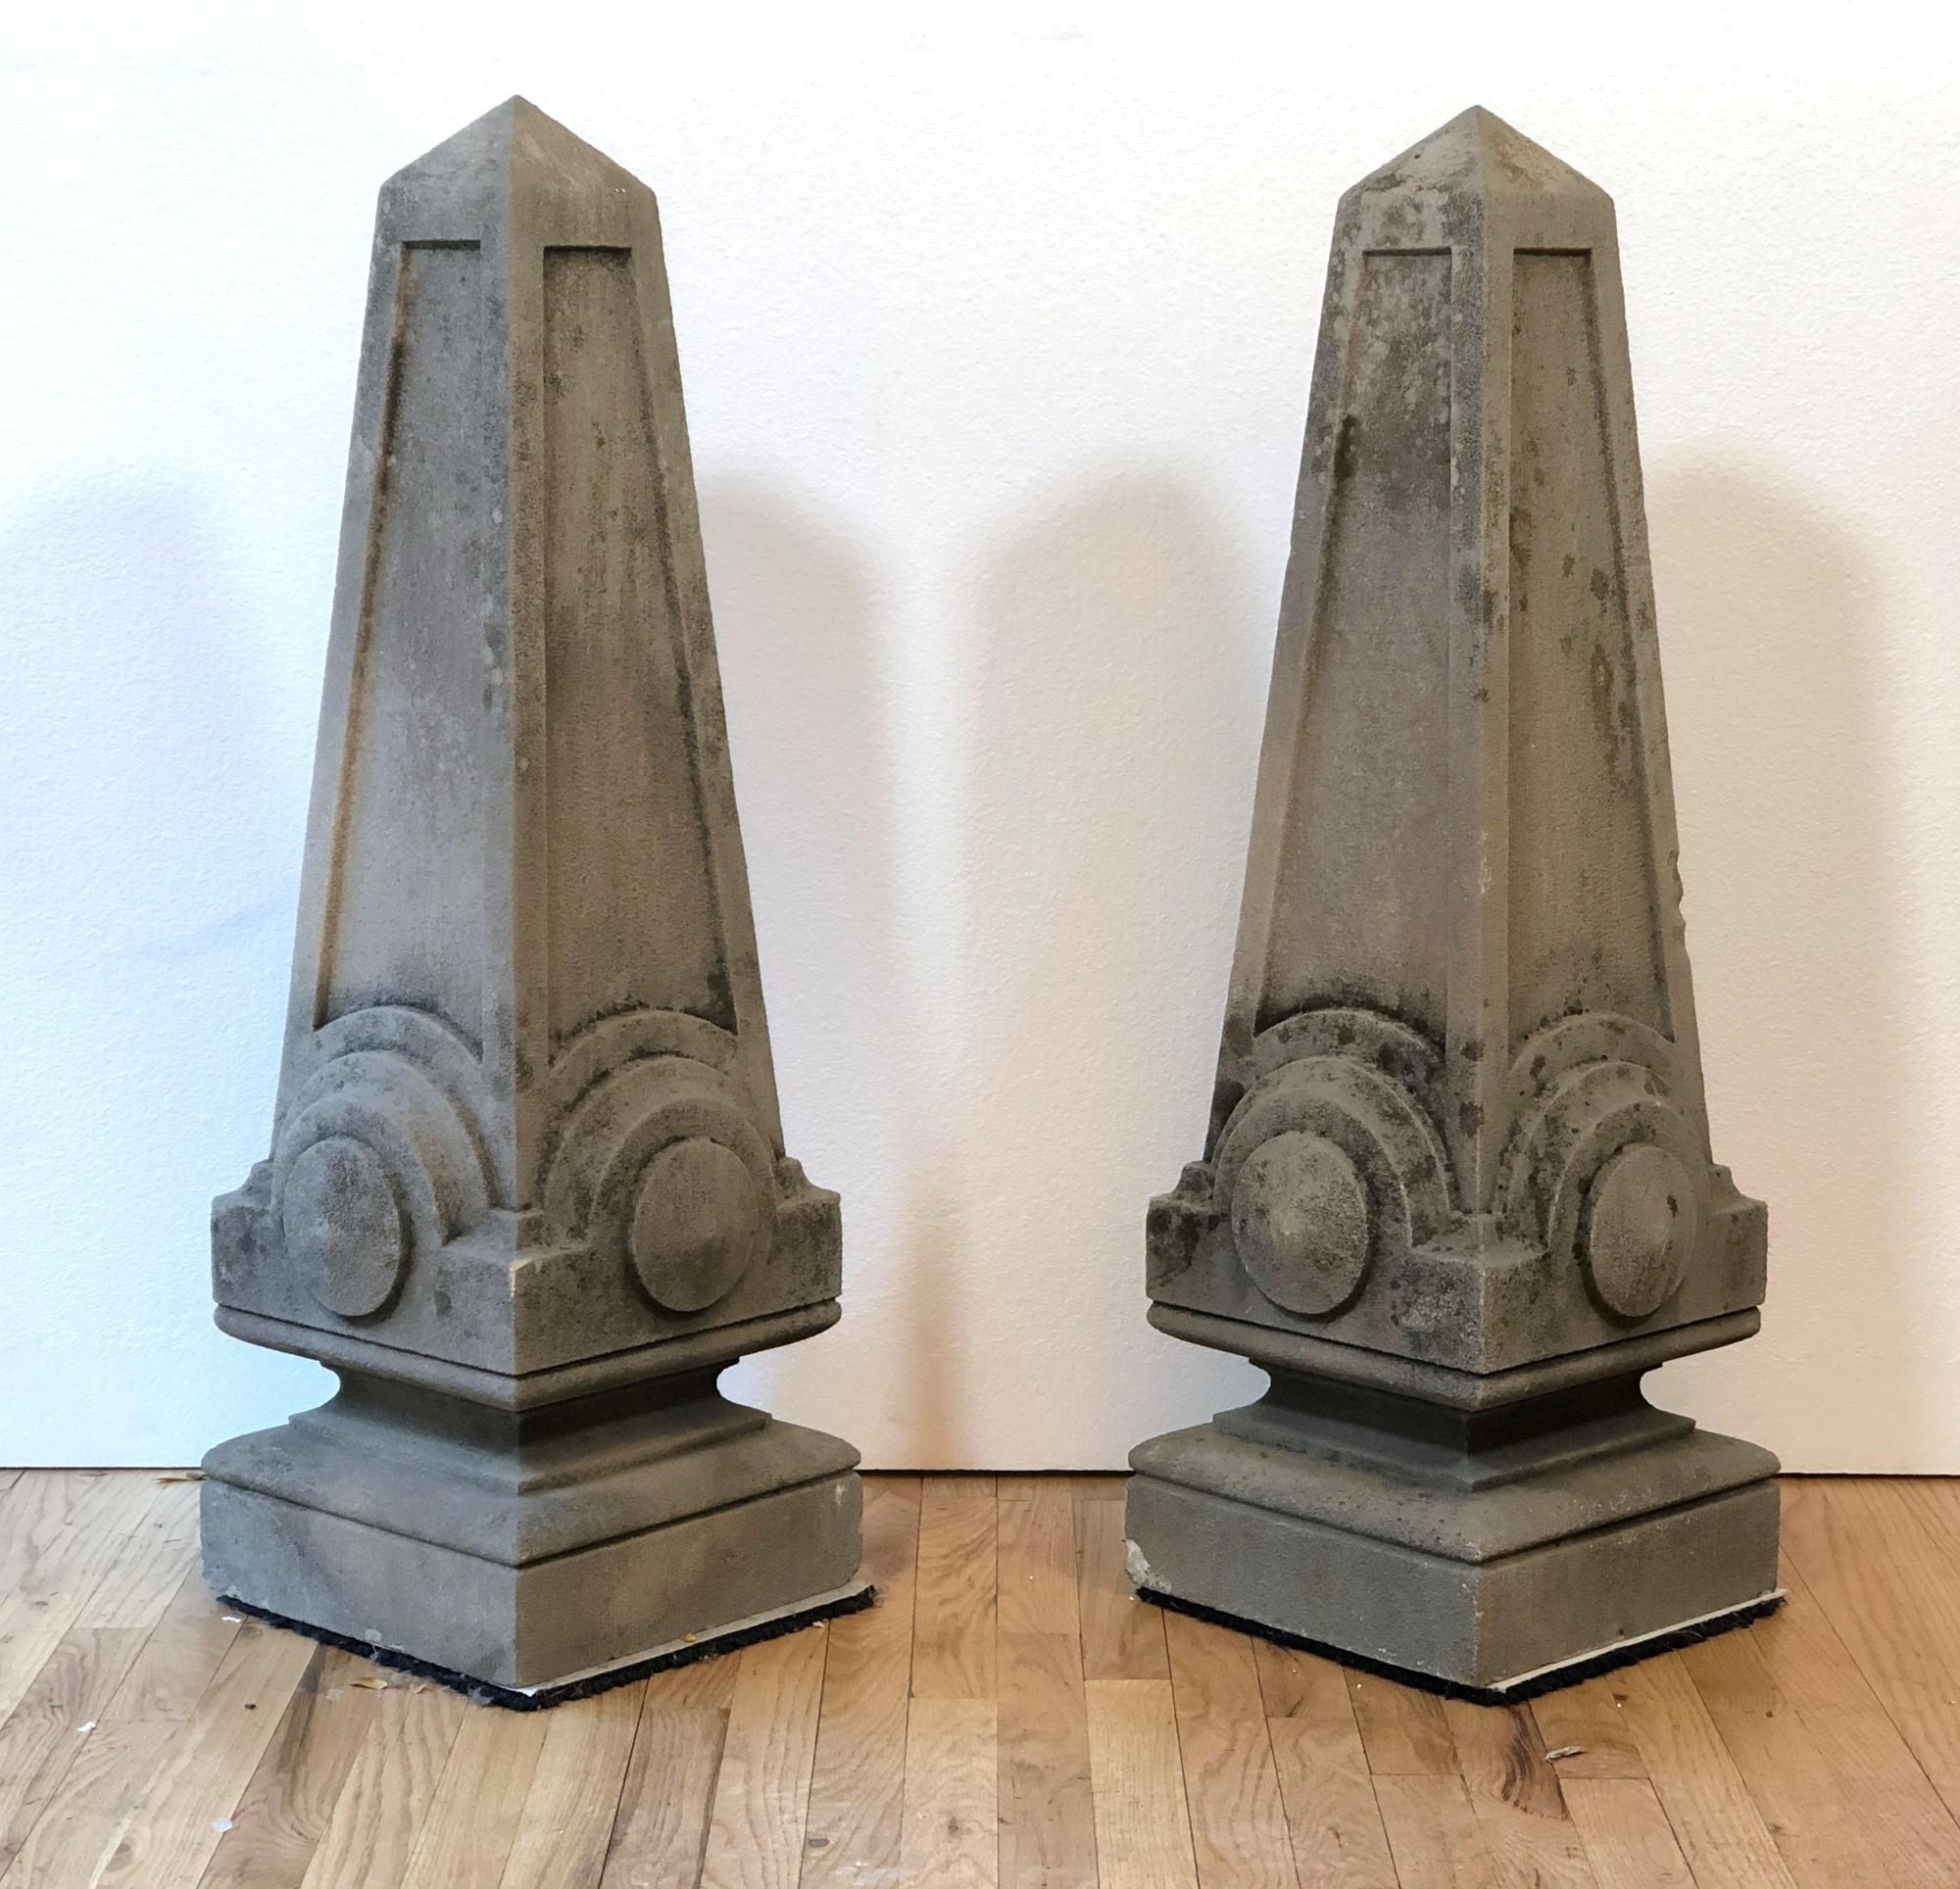 Pair of hand carved gray limestone obelisks from the mansion of Billy Rose the lyricist. The Rose Hill Mansion was located on 98 acres of land at 773 Armonk- New Castle, Mount Kisco, NY. The original Tudor style manor built in 1904 at 10,000 square